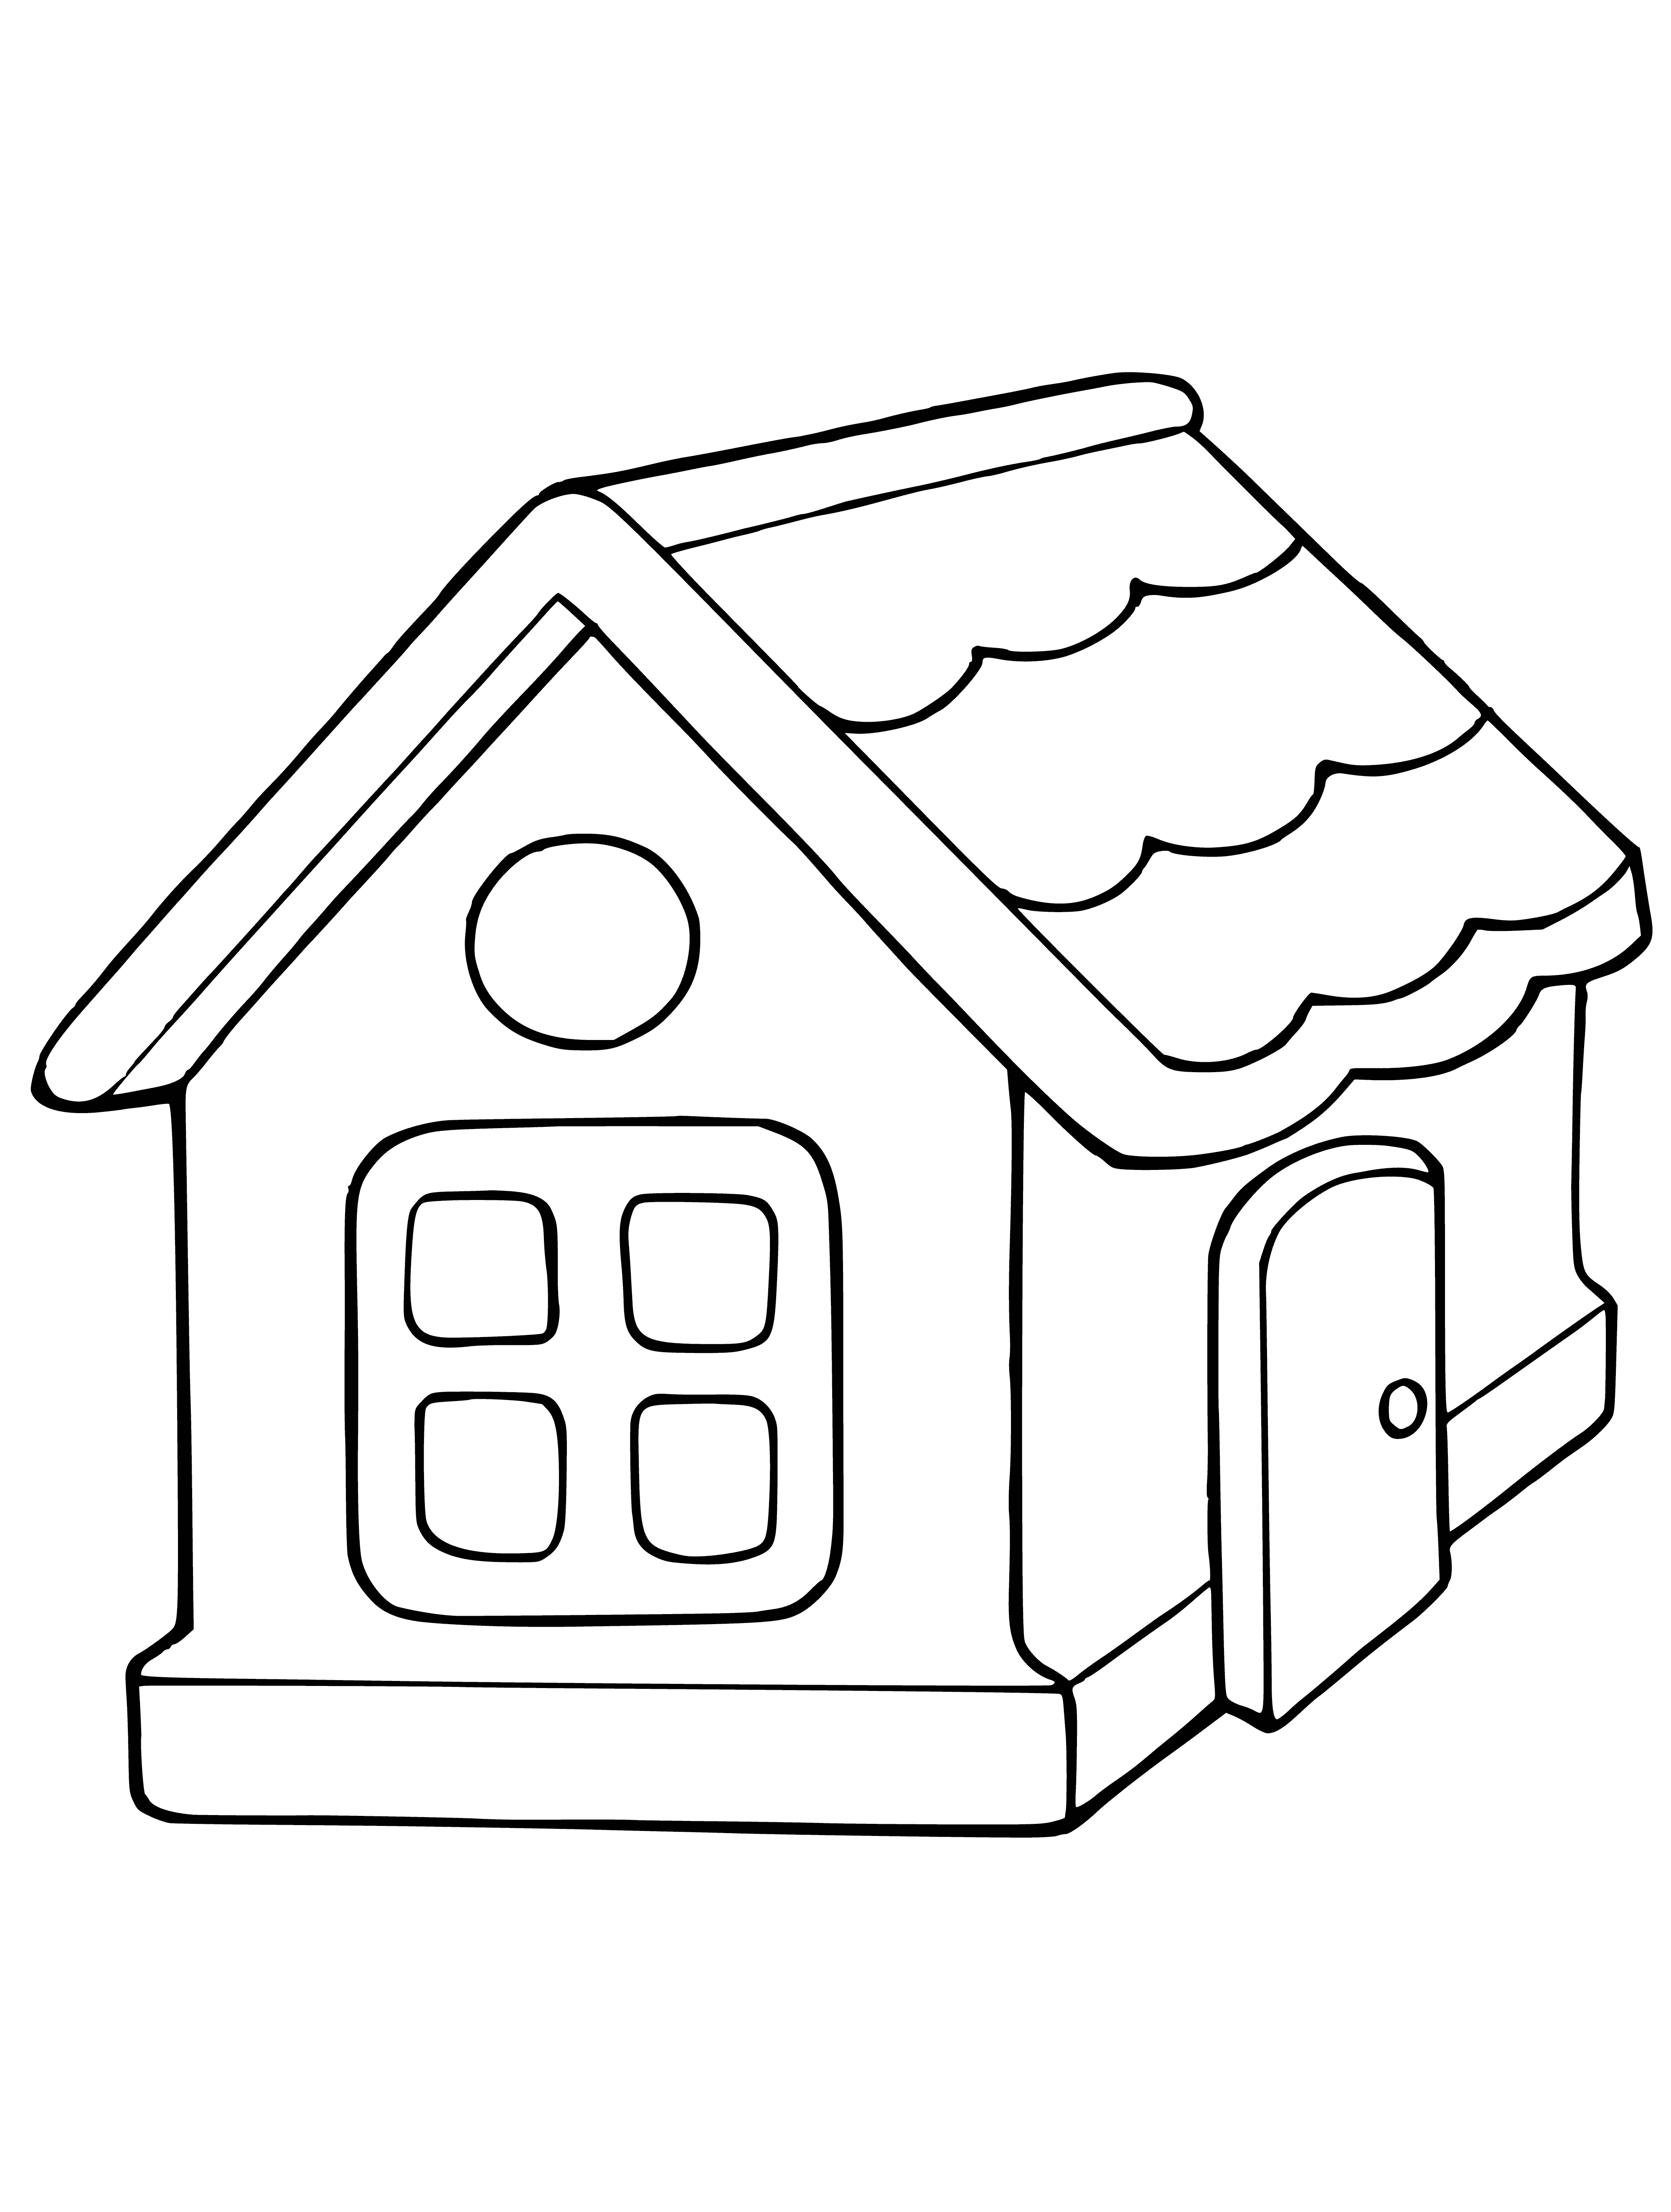 coloring page: A blue toy house with a white roof, door and two windows. A green tree beside it. #toyhouse #blue #white